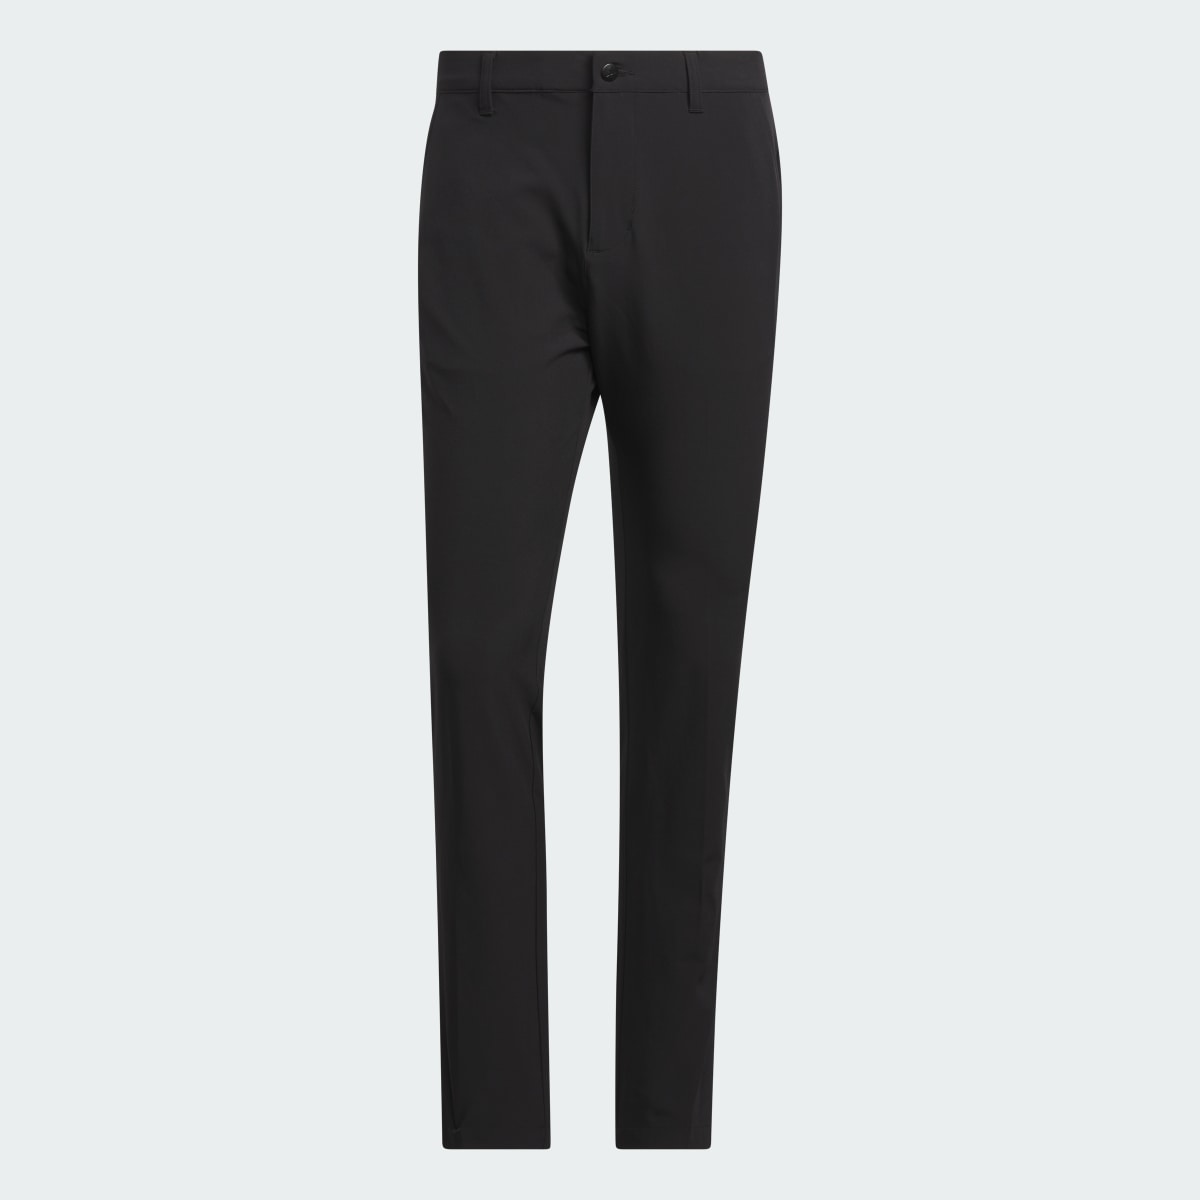 Adidas Ultimate365 Tapered Golf Trousers. 4